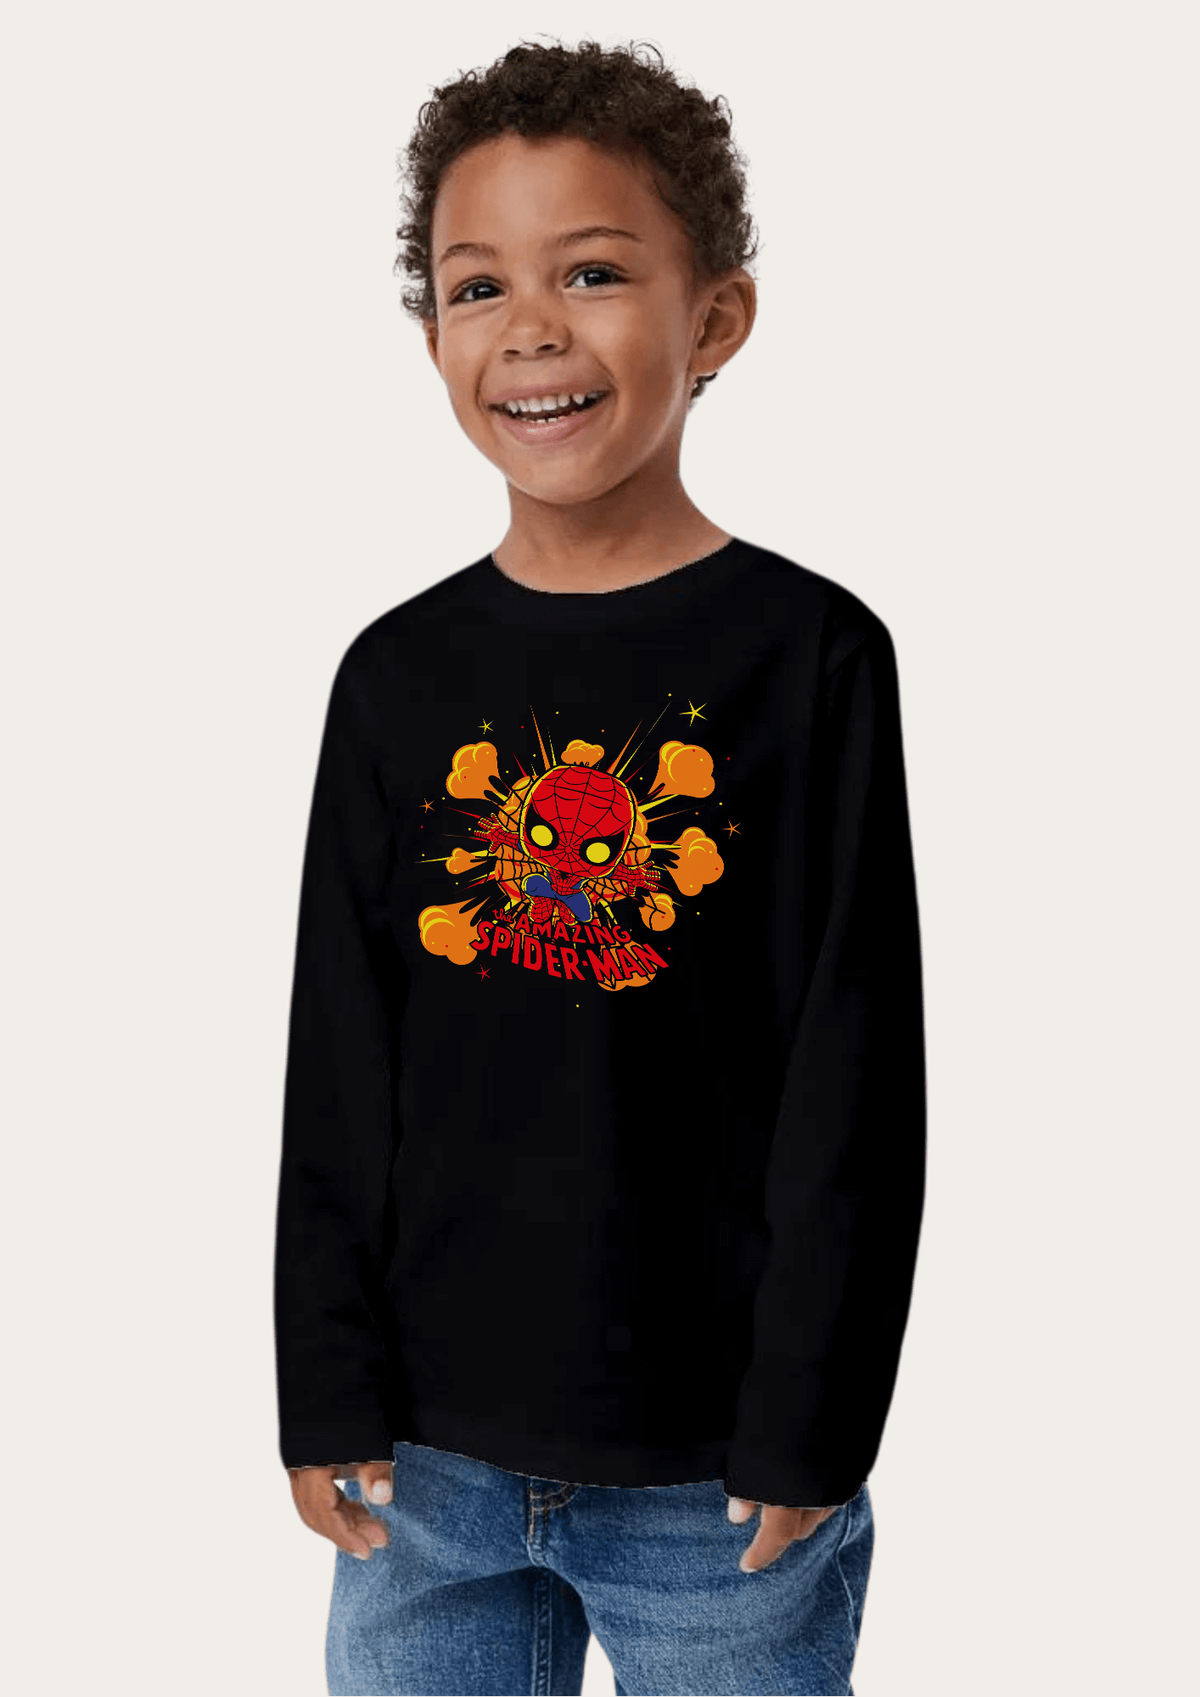 Amazing Spiderman Printed Black Full Sleeves Kids T-shirt By Offmint